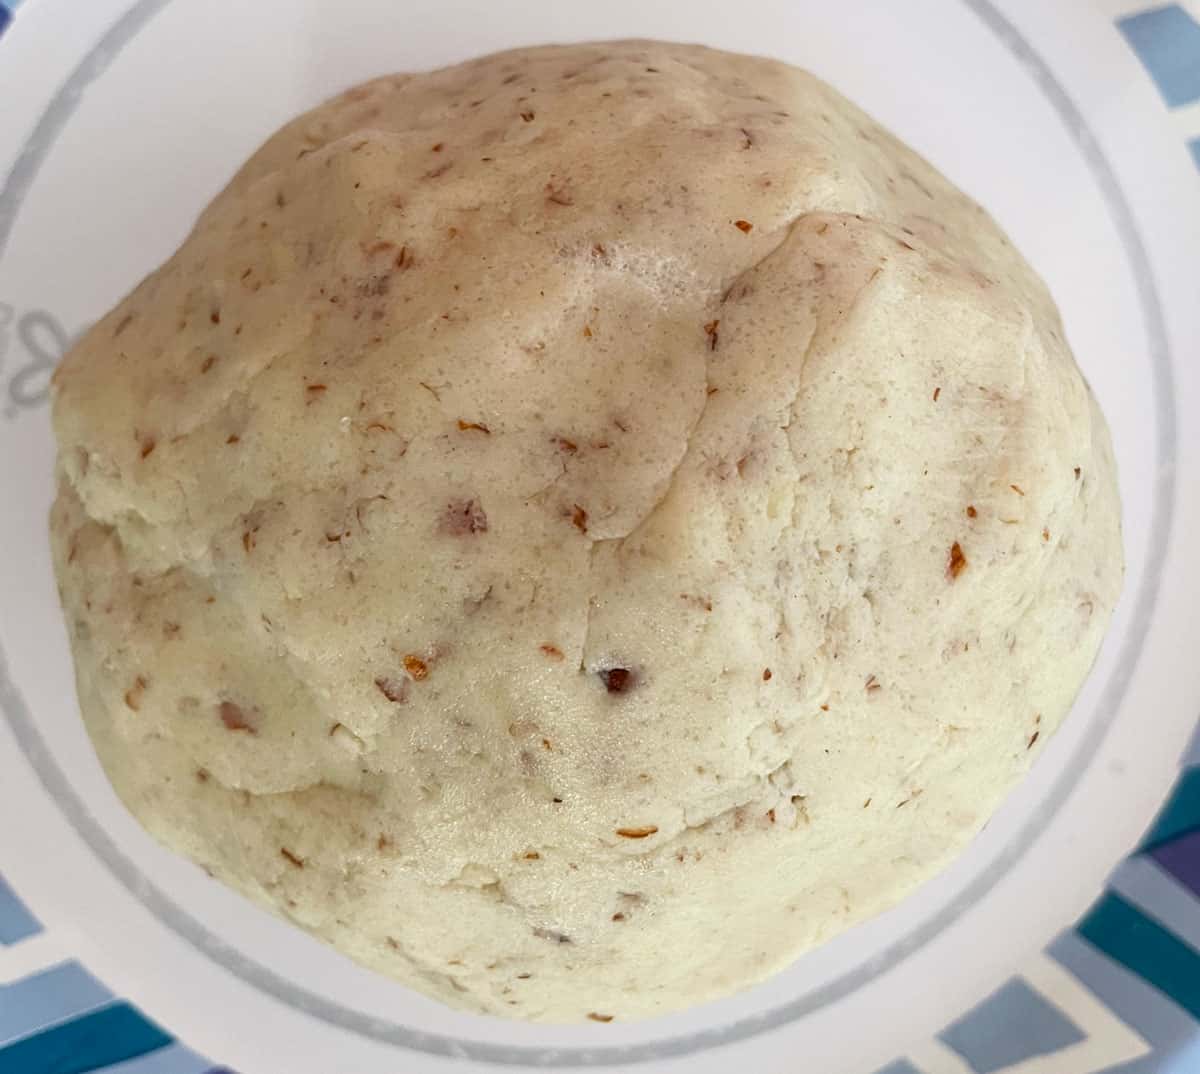 Almond Crescent cookie dough is molded into a ball after taking the dough out of the mixer bowl.